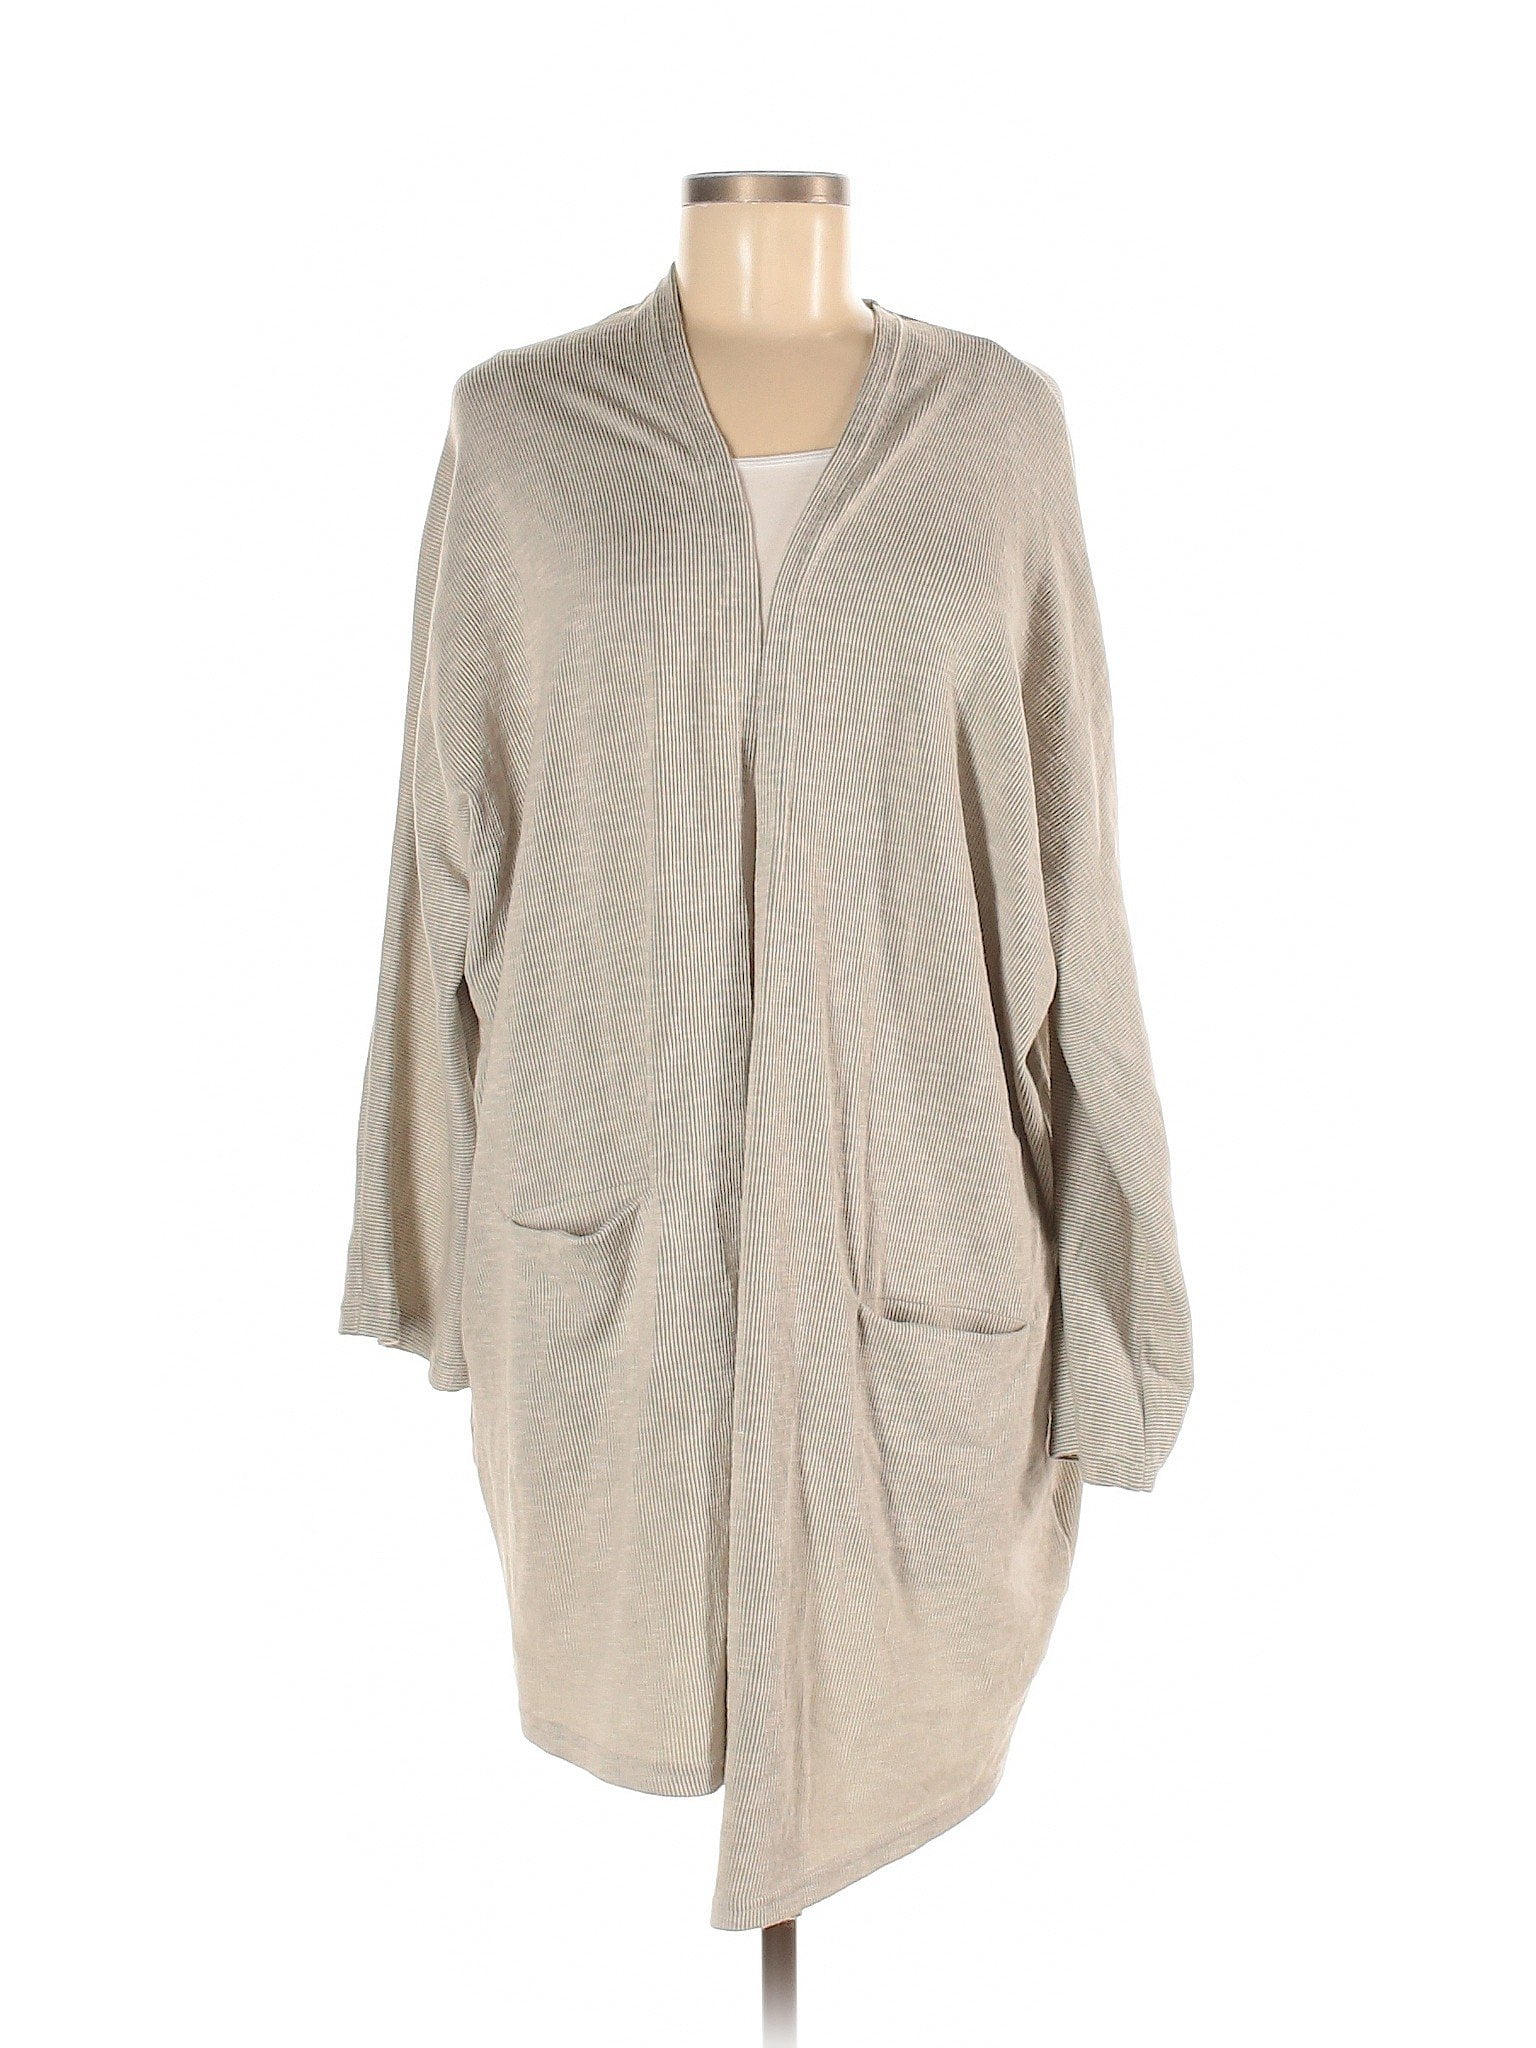 DONNI - Pre-Owned DONNI Women's One Size Fits All Cardigan - Walmart ...